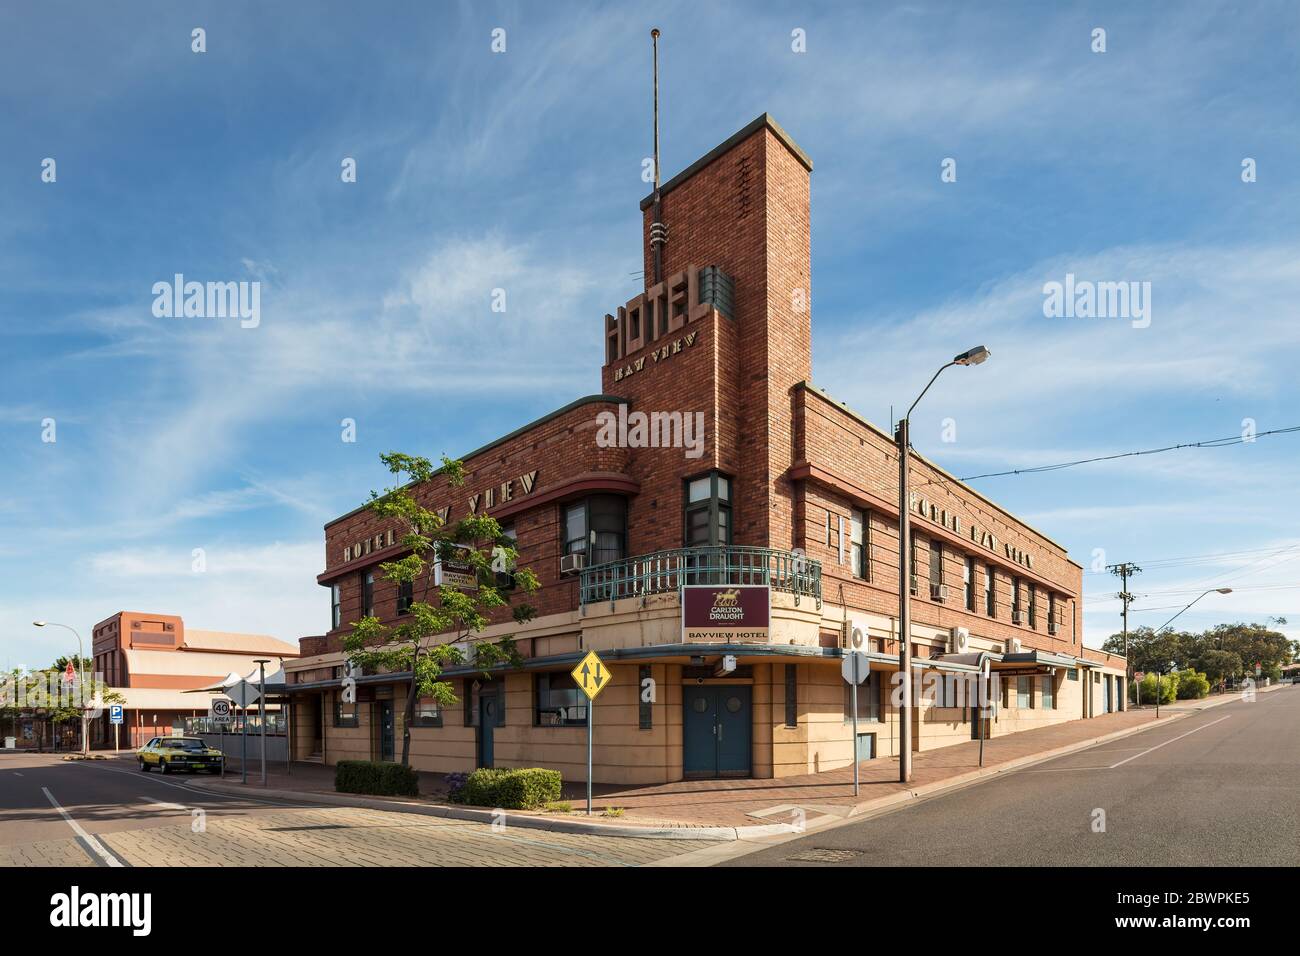 Whyalla South Australia November 17th 2019 : Exterior view of the art deco Hotel Bay View in Whyall South Australia Stock Photo